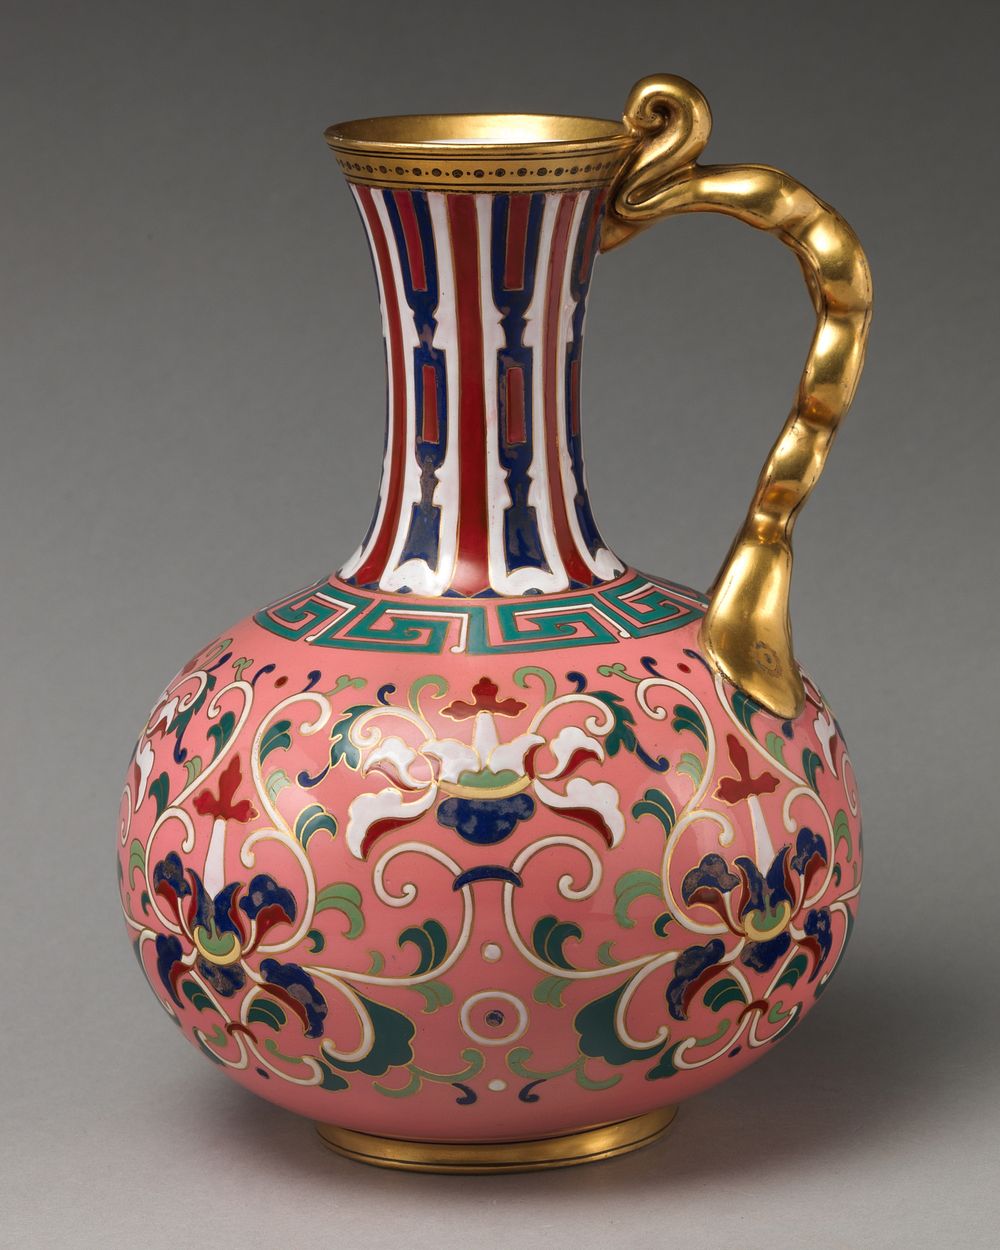 Ewer with "cloisonne" decoration